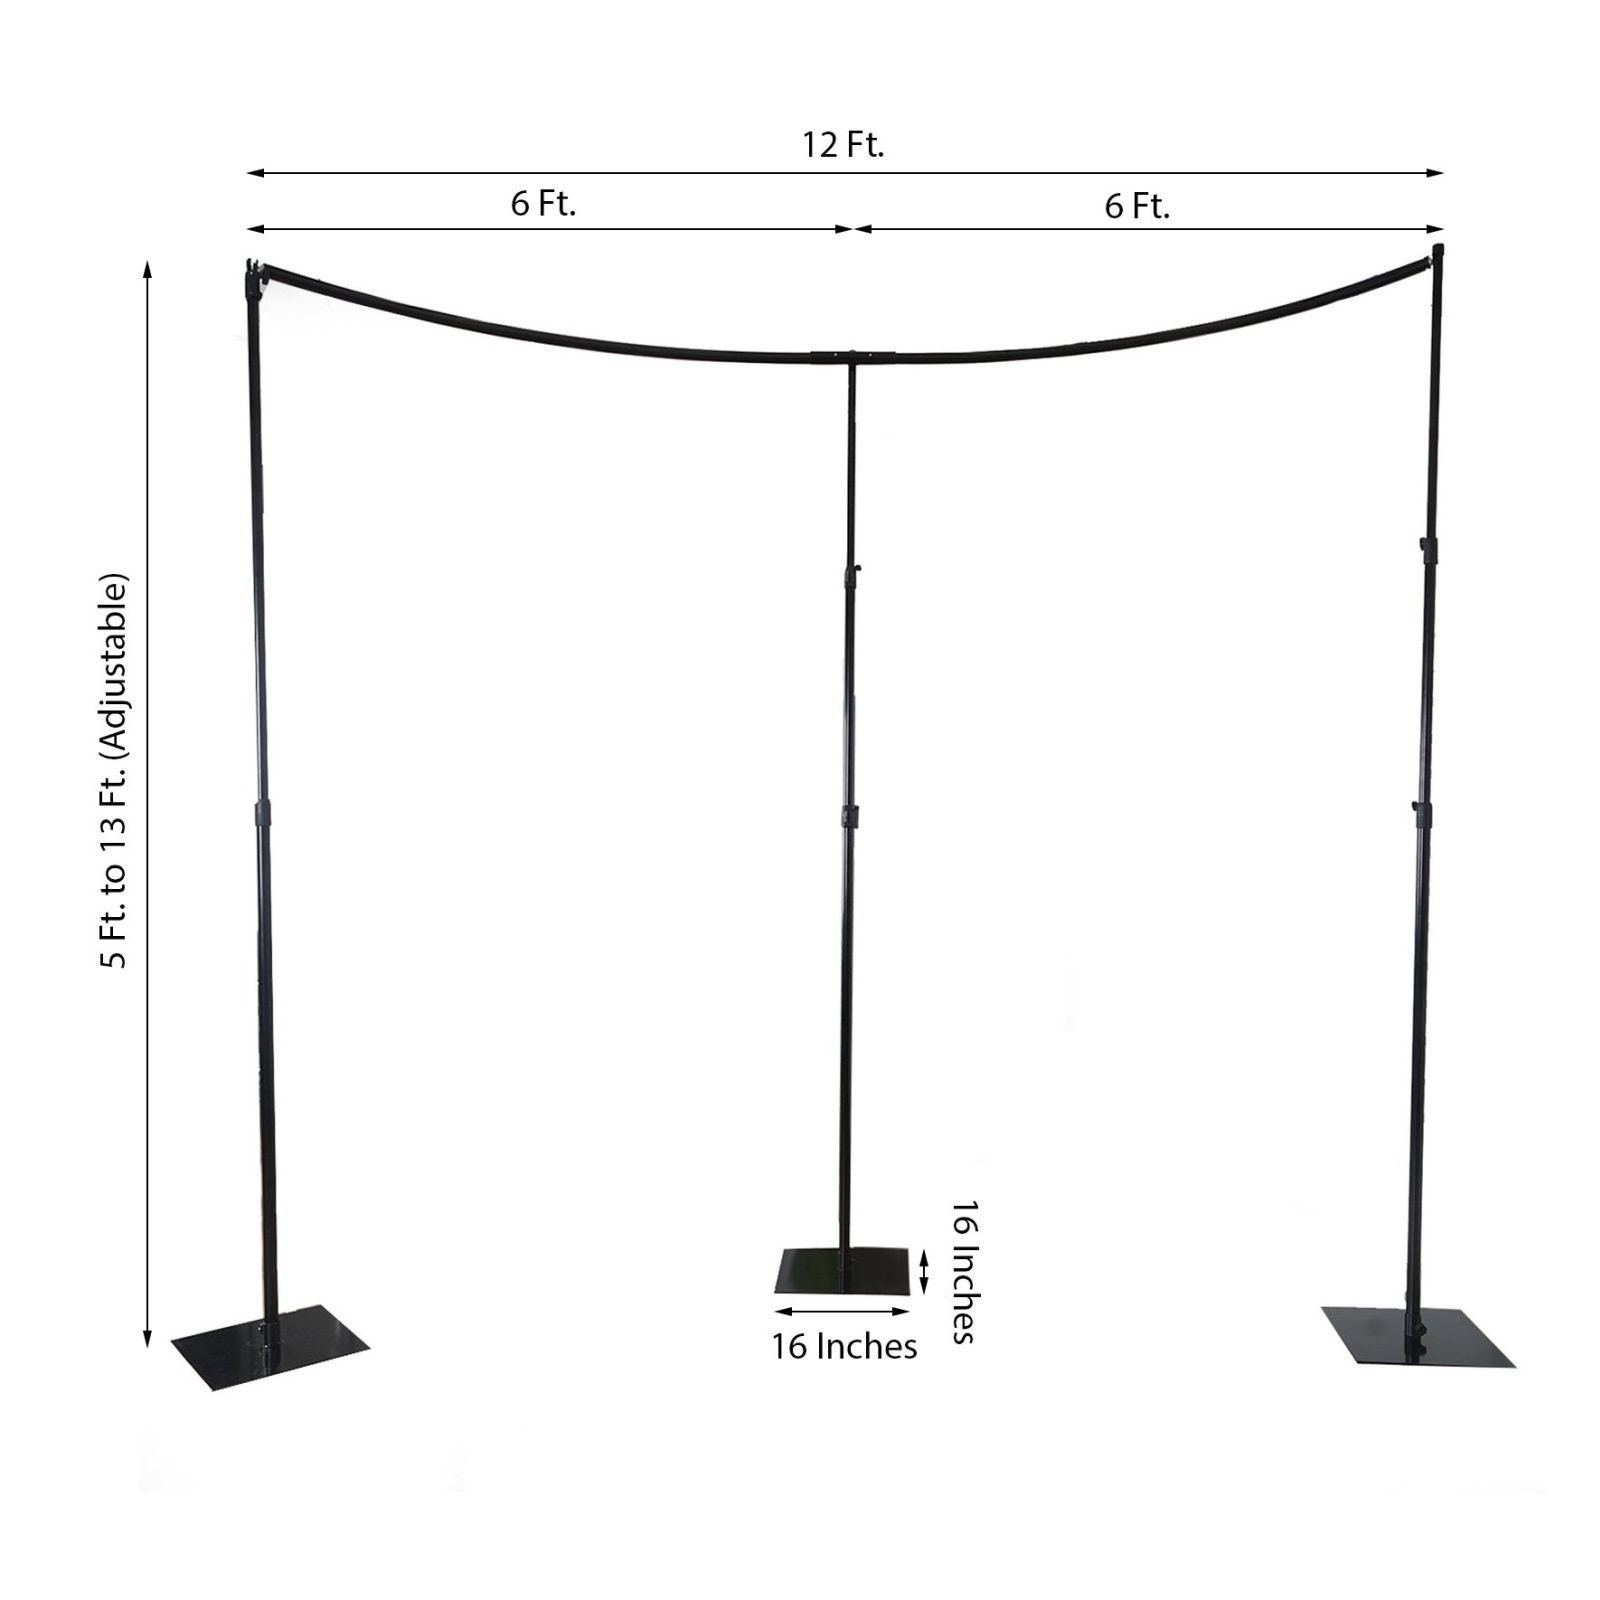 Balsacircle Black 11 ft Heavy Duty Adjustable Curved Pipe and Drape Kit Backdrop Support Stand - Wedding Party Photo Booth Studio